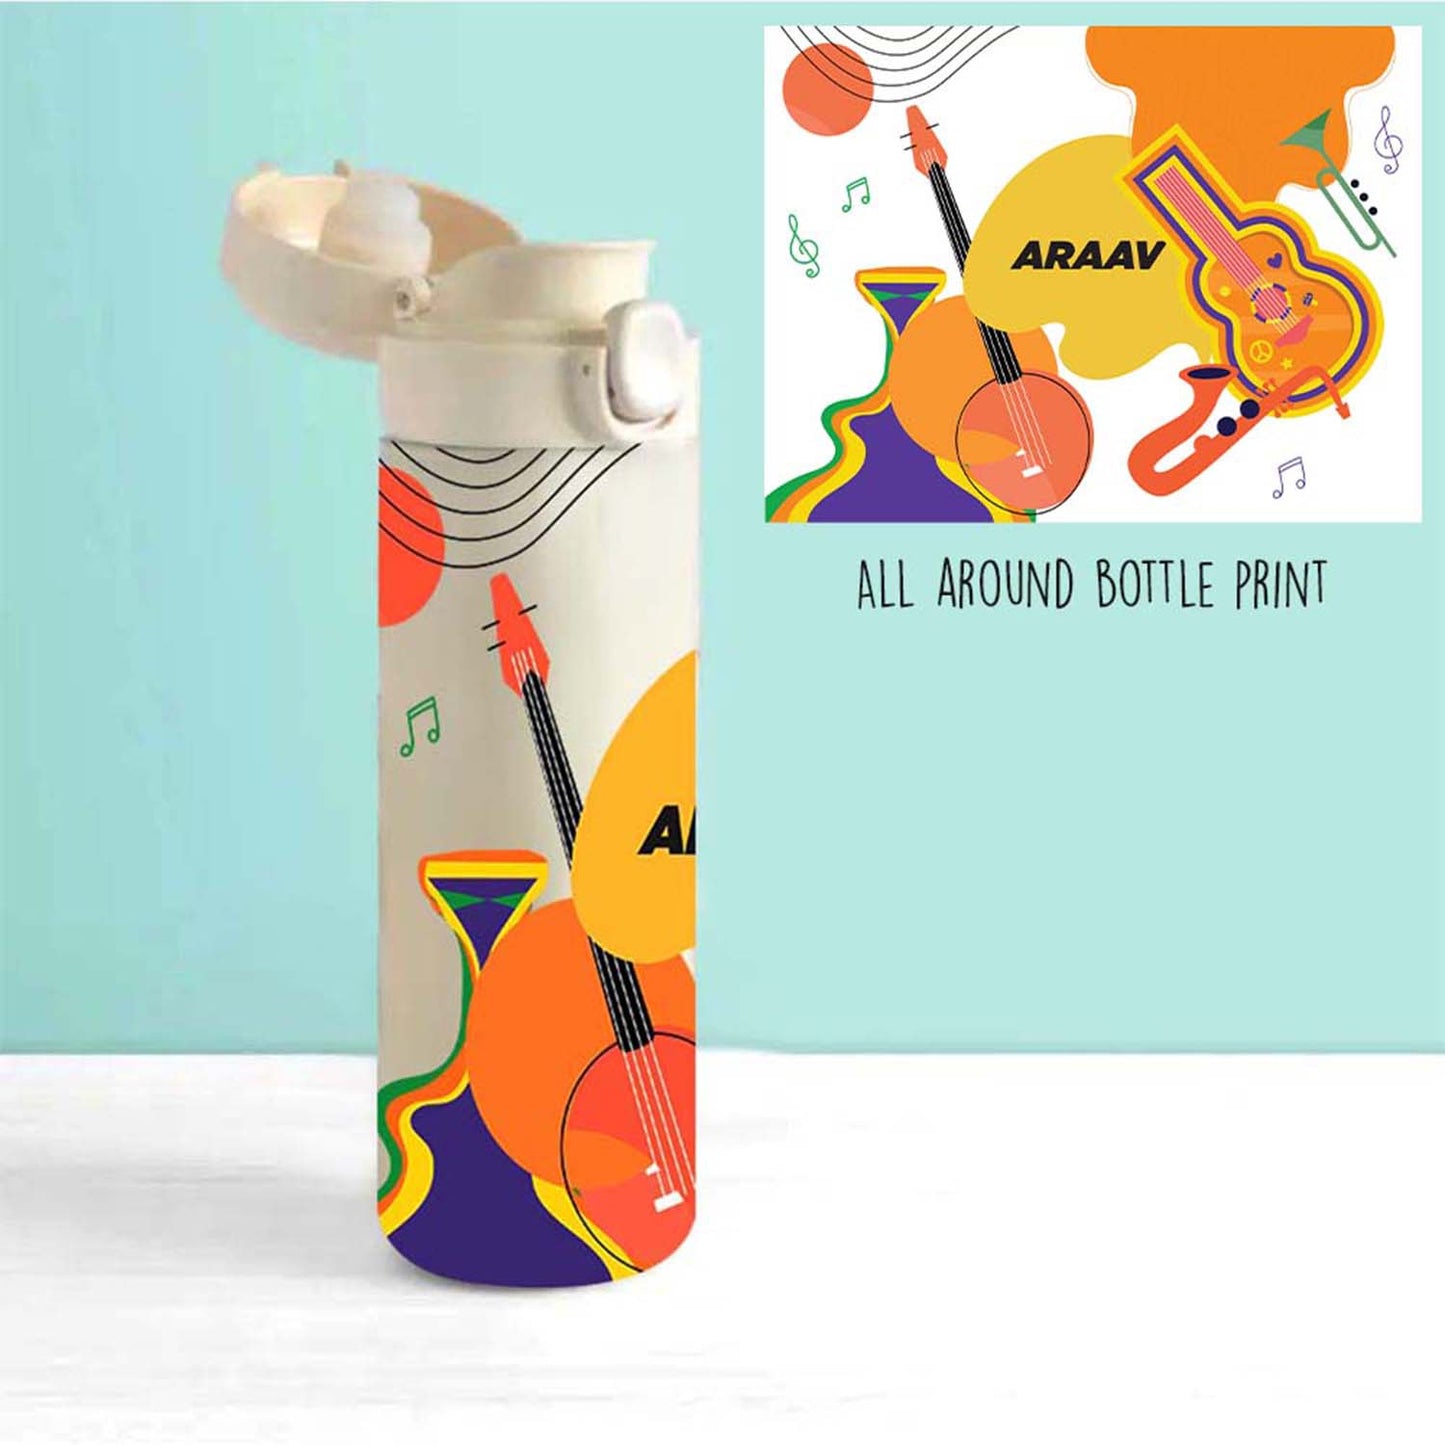 
                  
                    Insulated Water Bottle
                  
                